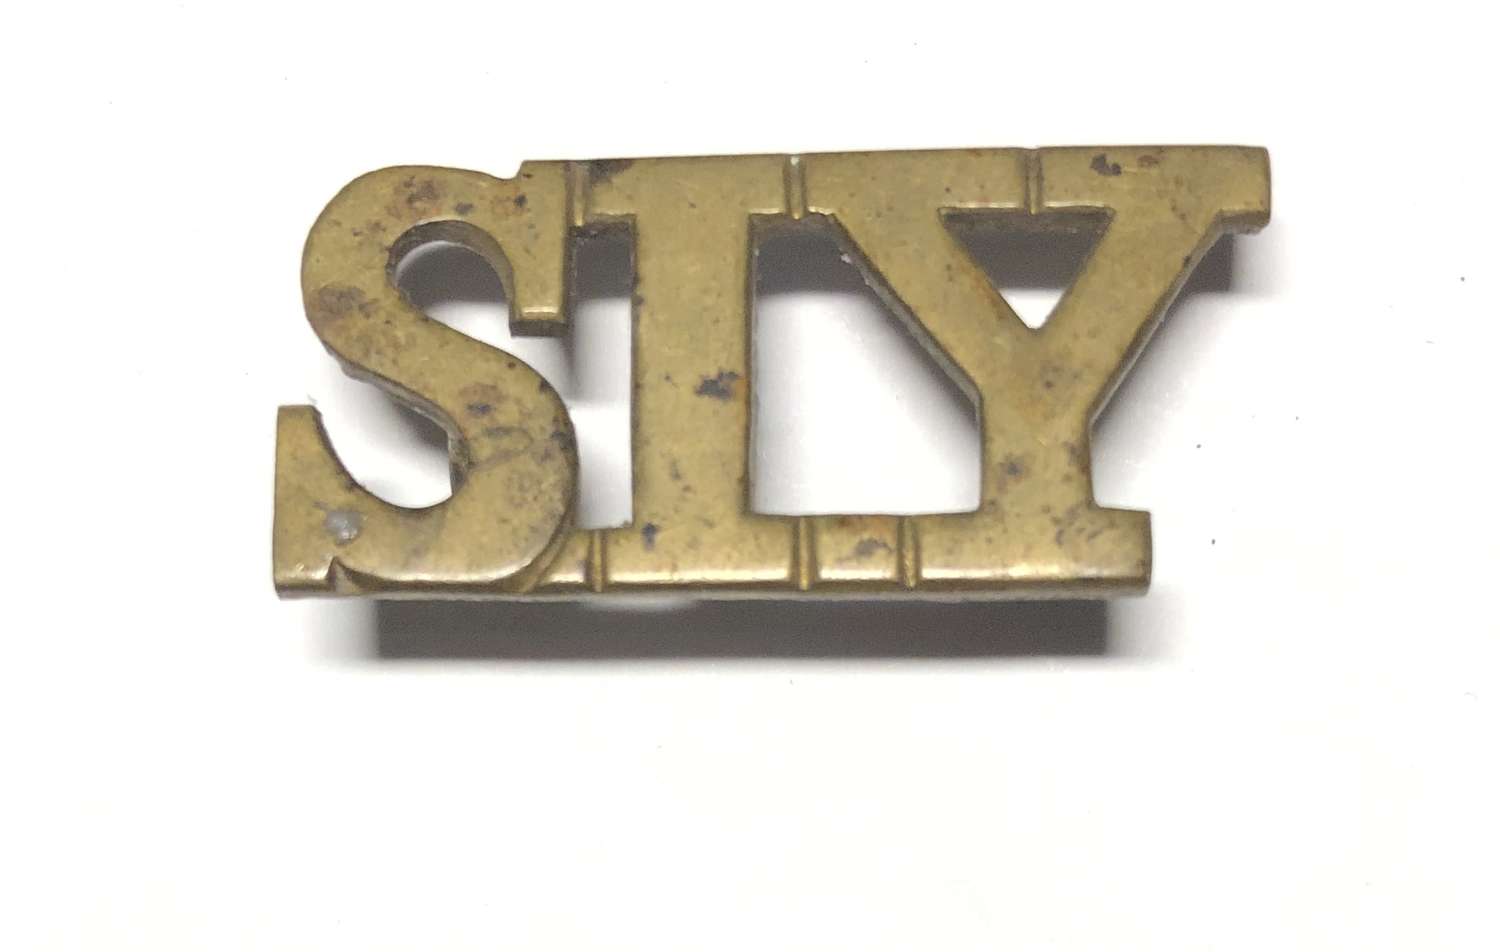 SIY South of Ireland Yeomanry shoulder title c1902-08.